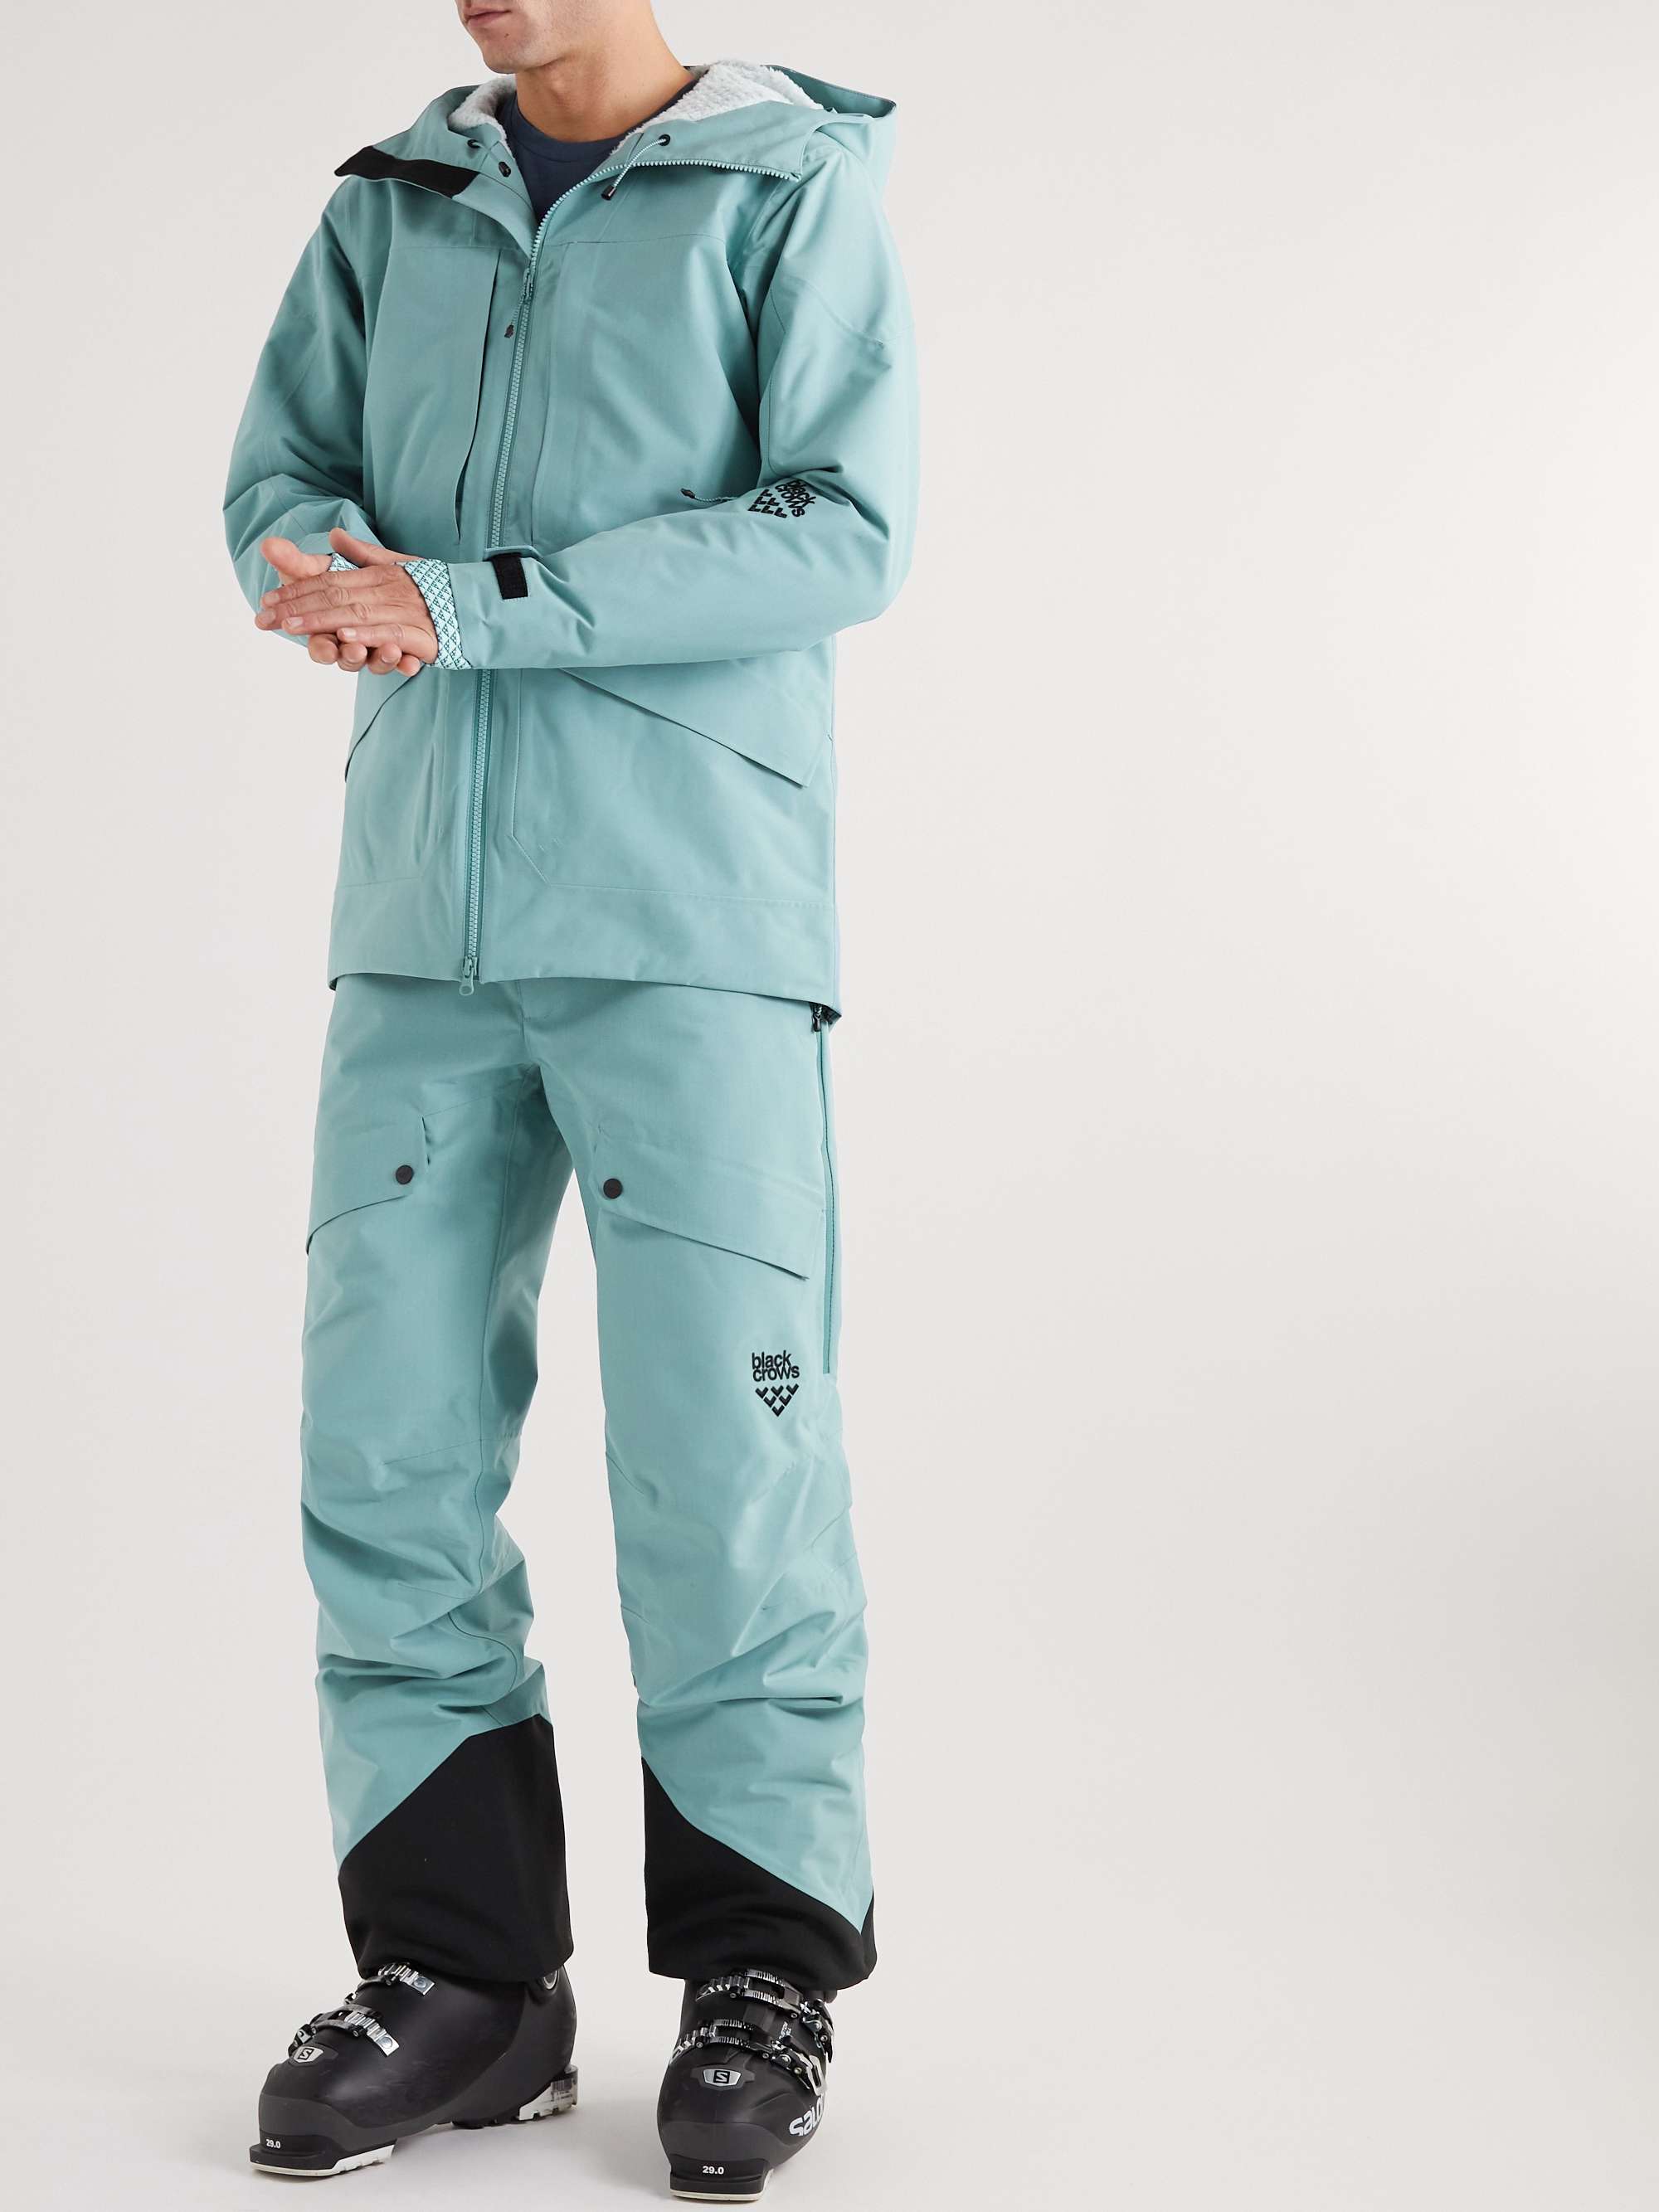 BLACK CROWS Ora Body Map Recycled Ripstop Ski Trousers